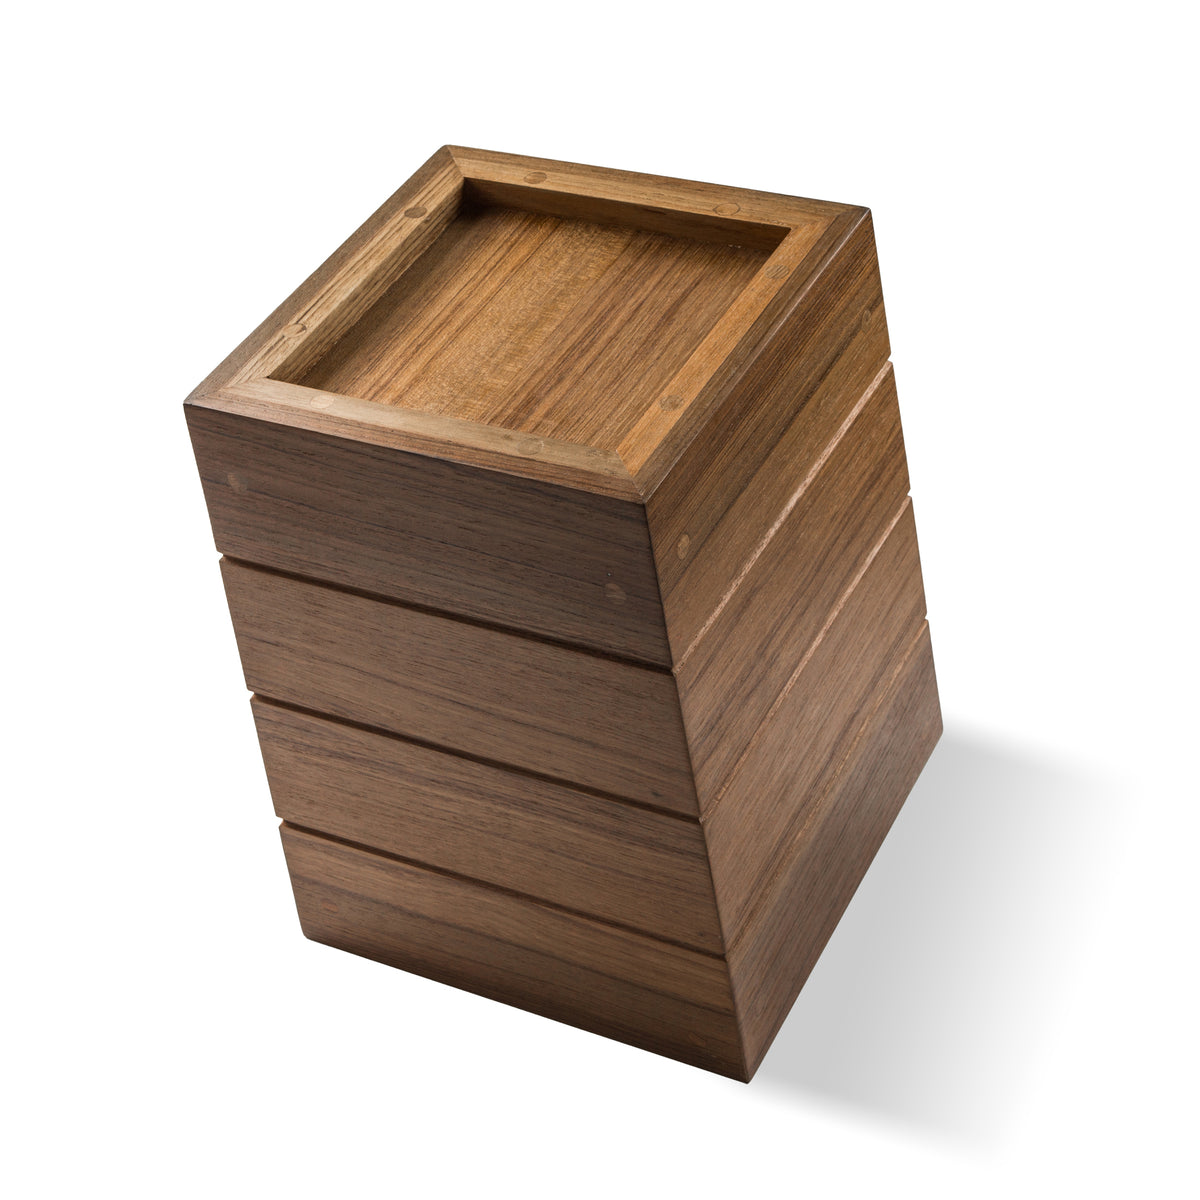 Small Waste Basket - 63102